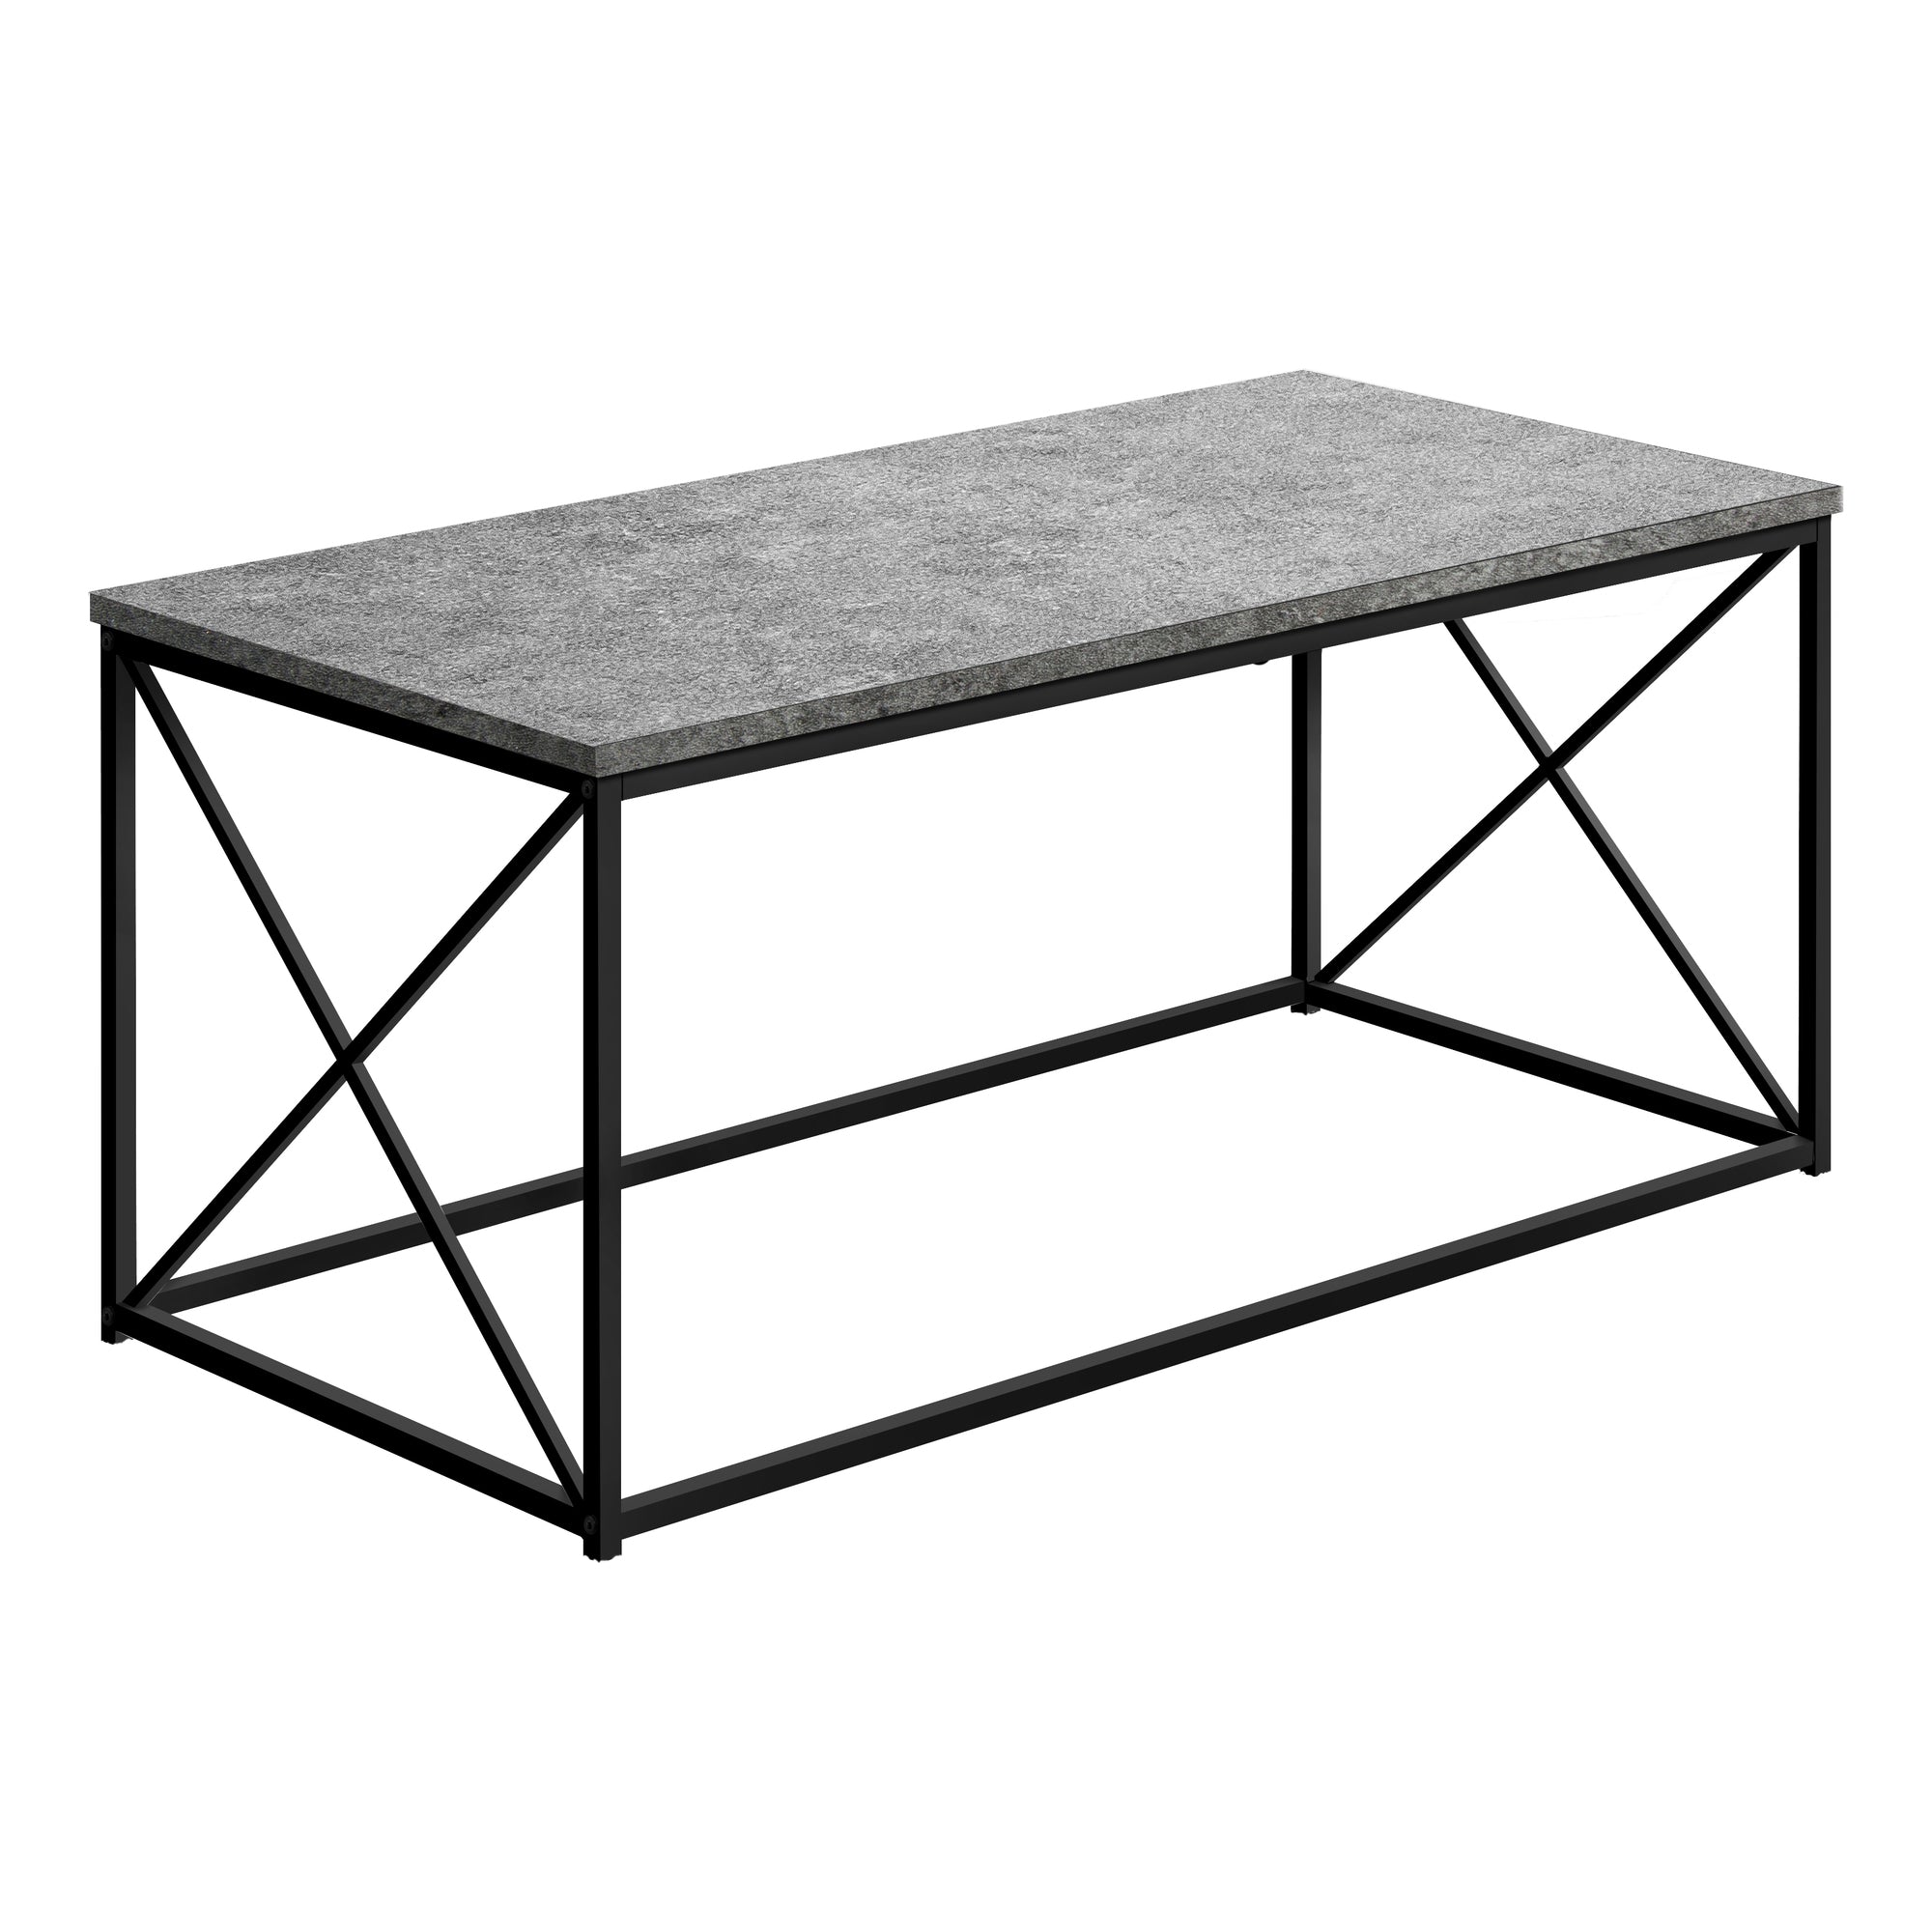 MN-583785    Coffee Table, Rectangular, Metal Base With X-Shaped Sides, 40"L - Grey Stone-Look, Black